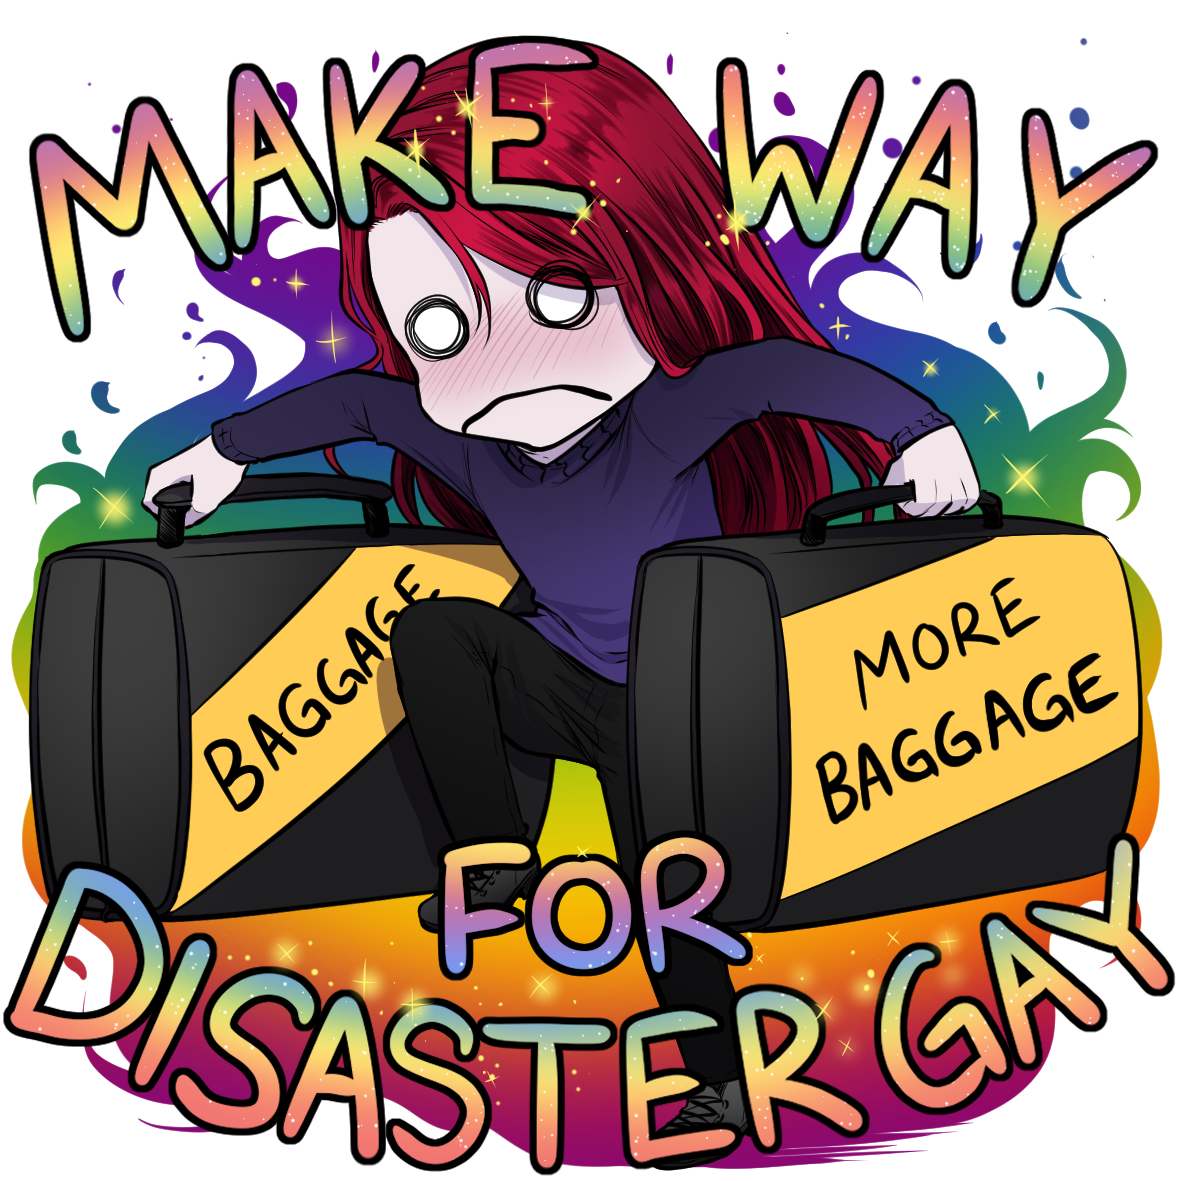 Make Way for Disaster Gay sticker